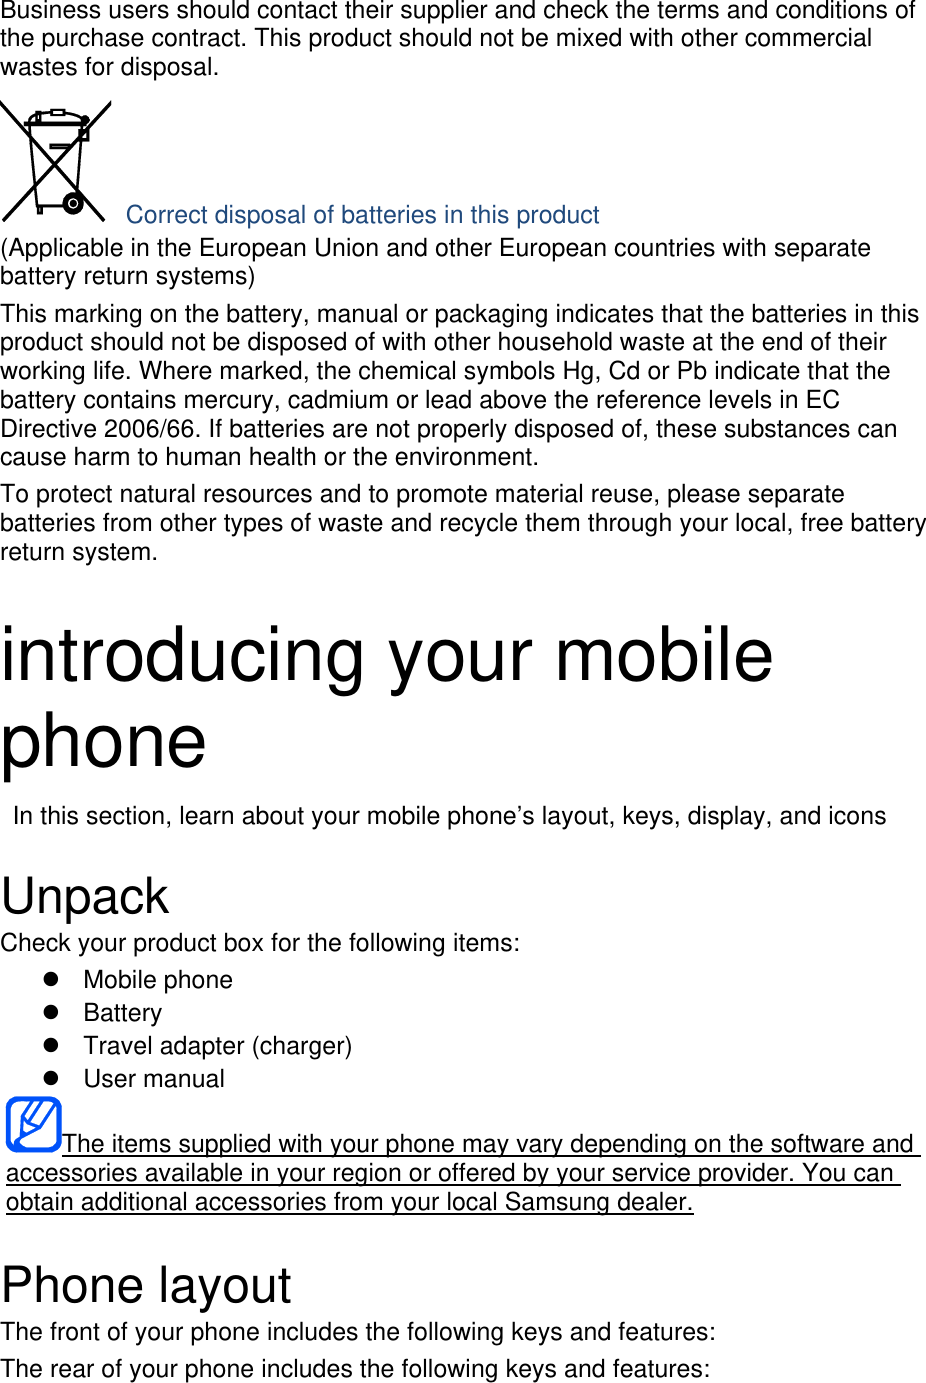 Business users should contact their supplier and check the terms and conditions of the purchase contract. This product should not be mixed with other commercial wastes for disposal.  Correct disposal of batteries in this product (Applicable in the European Union and other European countries with separate battery return systems) This marking on the battery, manual or packaging indicates that the batteries in this product should not be disposed of with other household waste at the end of their working life. Where marked, the chemical symbols Hg, Cd or Pb indicate that the battery contains mercury, cadmium or lead above the reference levels in EC Directive 2006/66. If batteries are not properly disposed of, these substances can cause harm to human health or the environment. To protect natural resources and to promote material reuse, please separate batteries from other types of waste and recycle them through your local, free battery return system.  introducing your mobile phone   In this section, learn about your mobile phone’s layout, keys, display, and icons  Unpack Check your product box for the following items:  Mobile phone  Battery   Travel adapter (charger)  User manual The items supplied with your phone may vary depending on the software and accessories available in your region or offered by your service provider. You can obtain additional accessories from your local Samsung dealer.  Phone layout The front of your phone includes the following keys and features: The rear of your phone includes the following keys and features: 